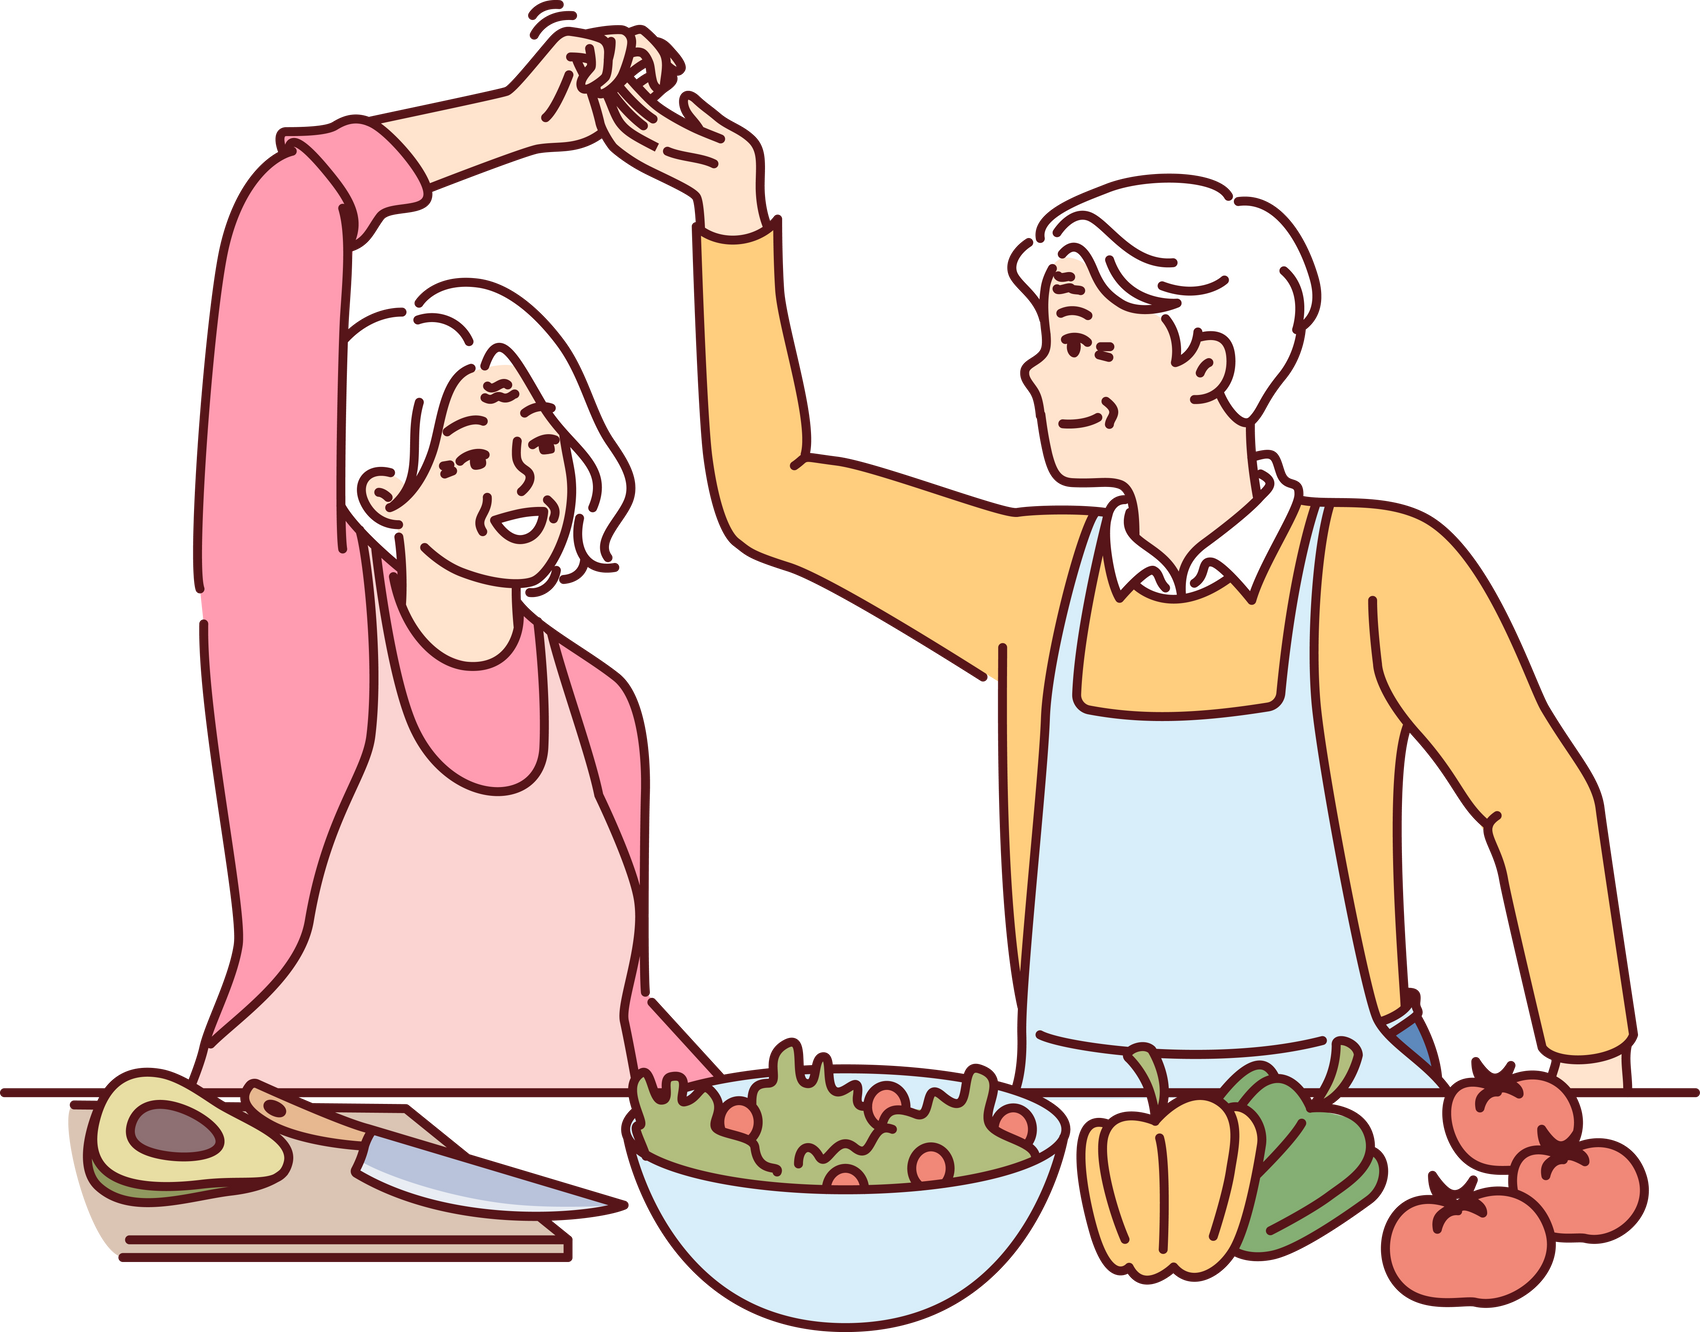 Elderly couple of vegans cooks dinner and dances together, calling for healthy lifestyle